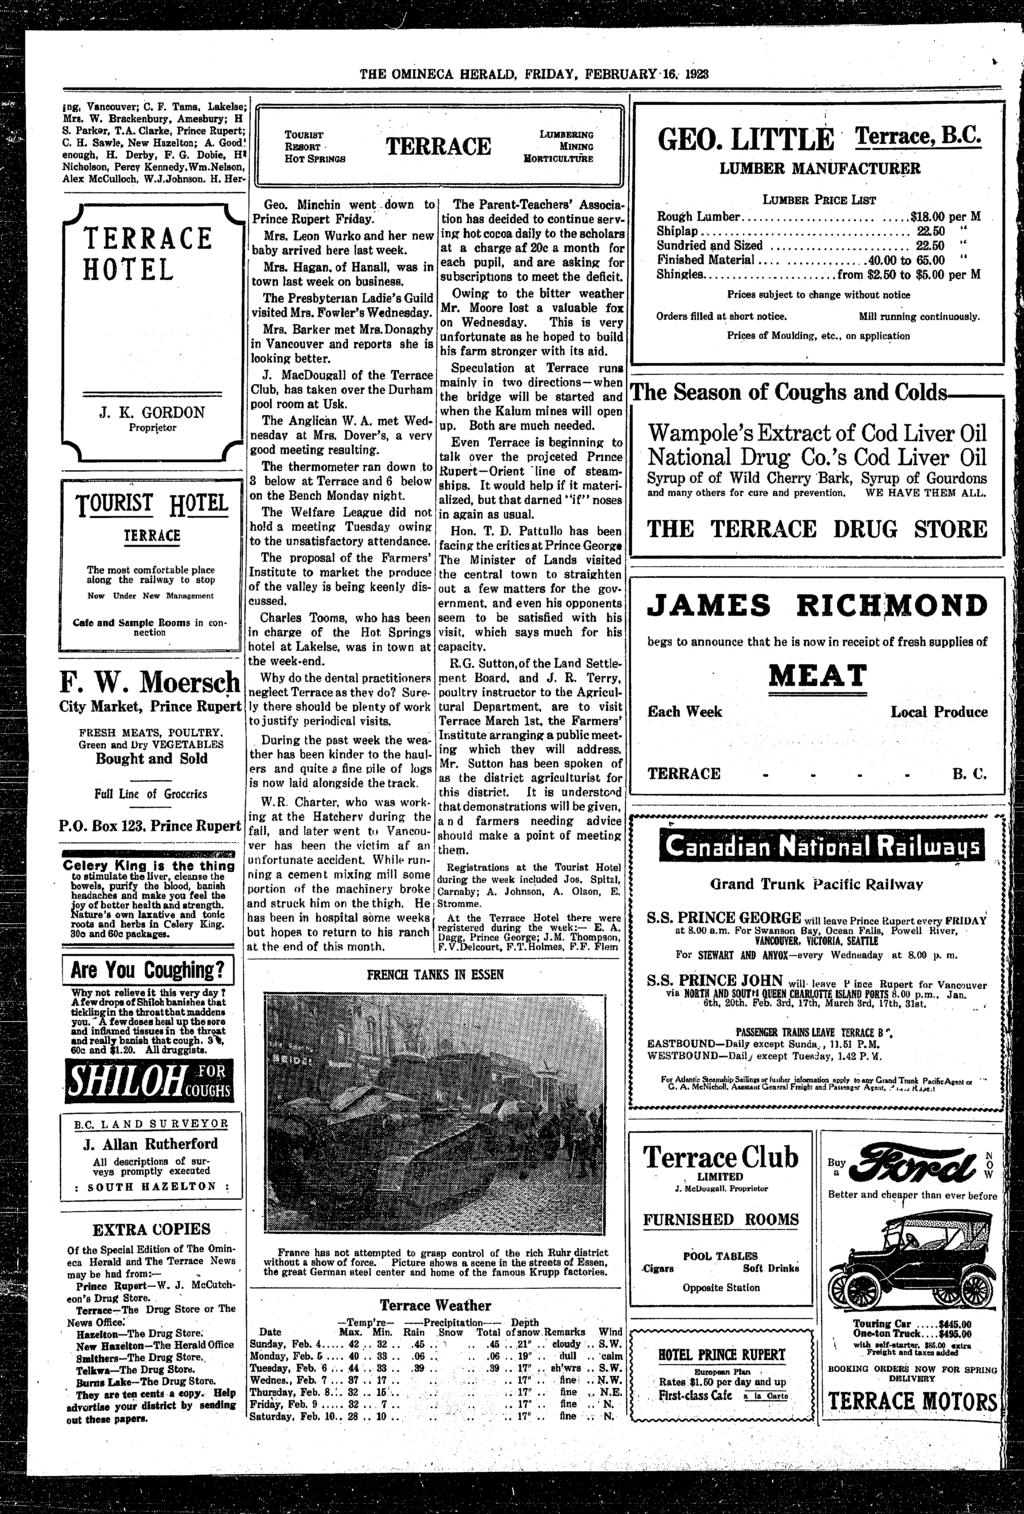 Tuesday, THE OMNECA HERALD, FRDAY, FEBRUARY'16.. 1923 " "'1.... ", ng, Vancouver; C. F. Tams, Lakelse; Mrs. W. Brackenbuw, Amesbury; H S. Parker, T.A. Clarke, Prnce Ruper; C. H. Sawle, New Hazelon; A.